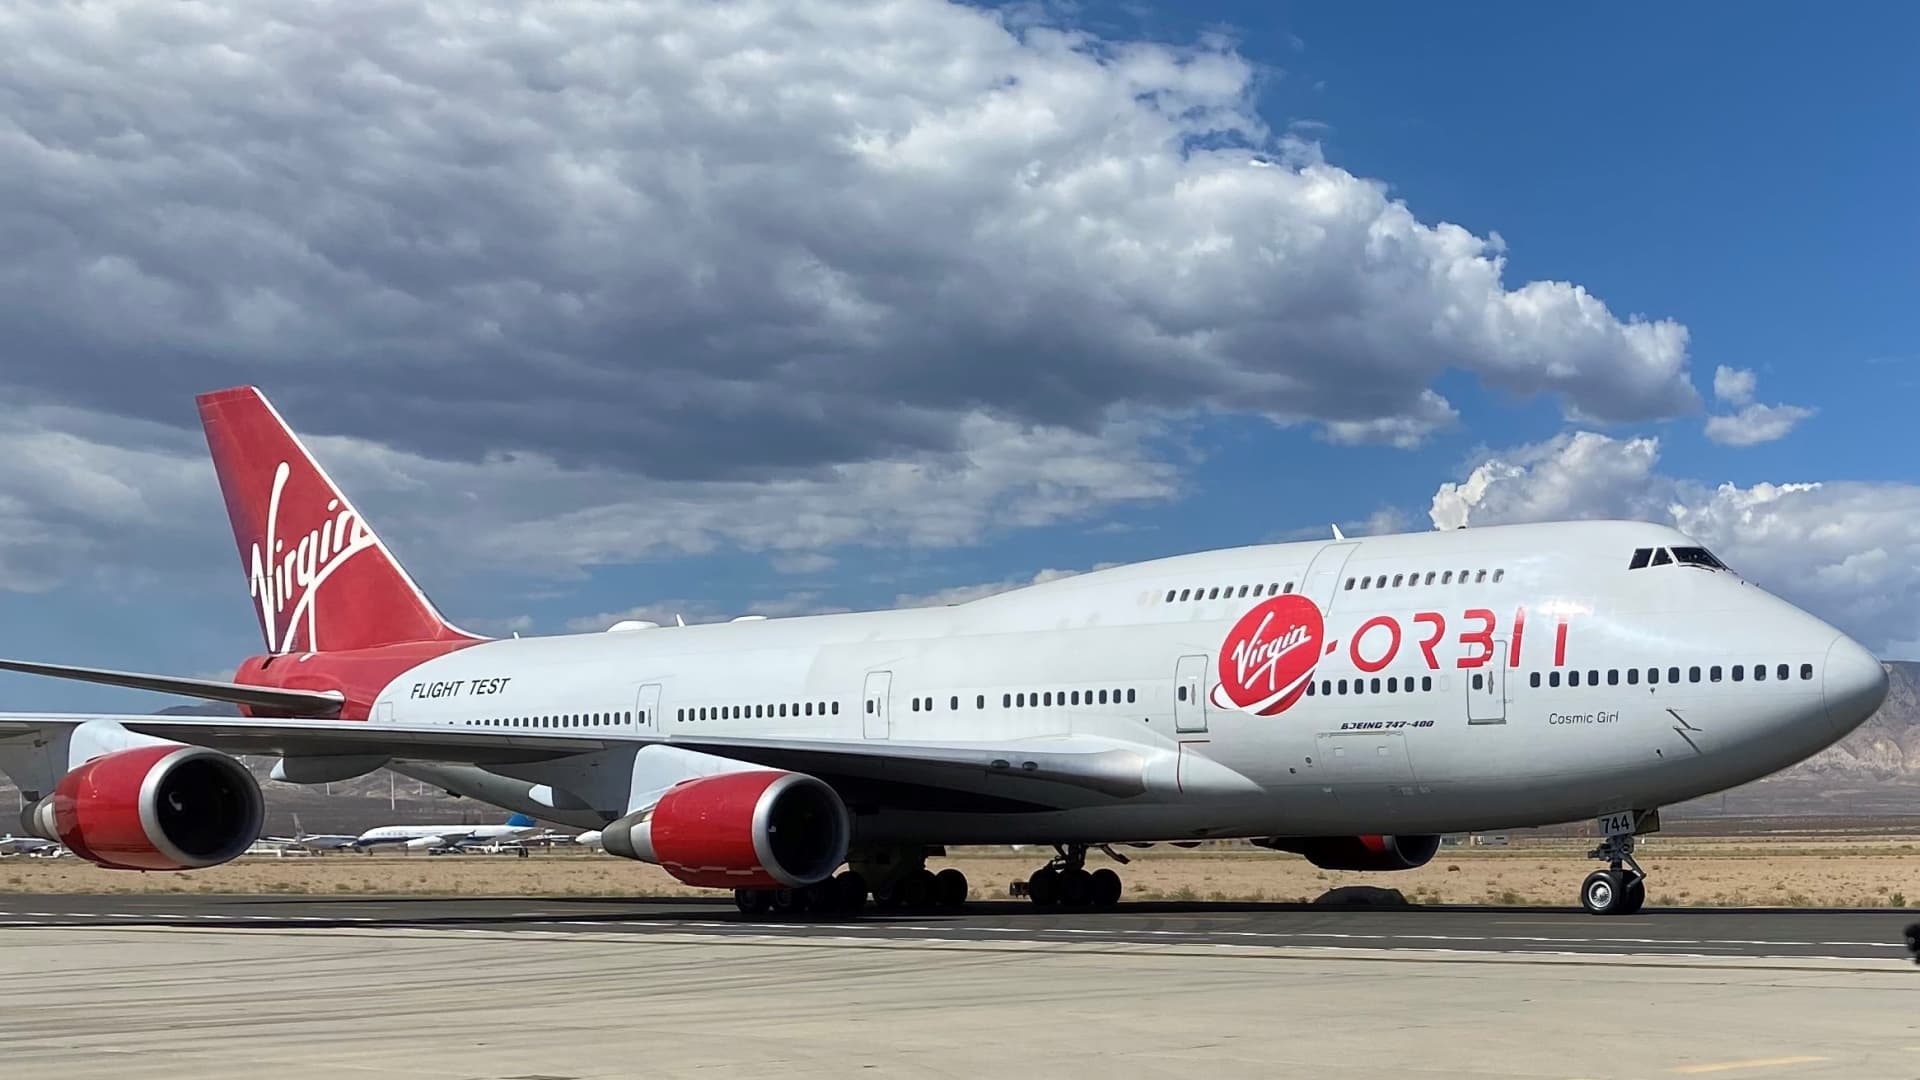 Virgin Orbit files for Chapter 11 bankruptcy protection in the U.S.